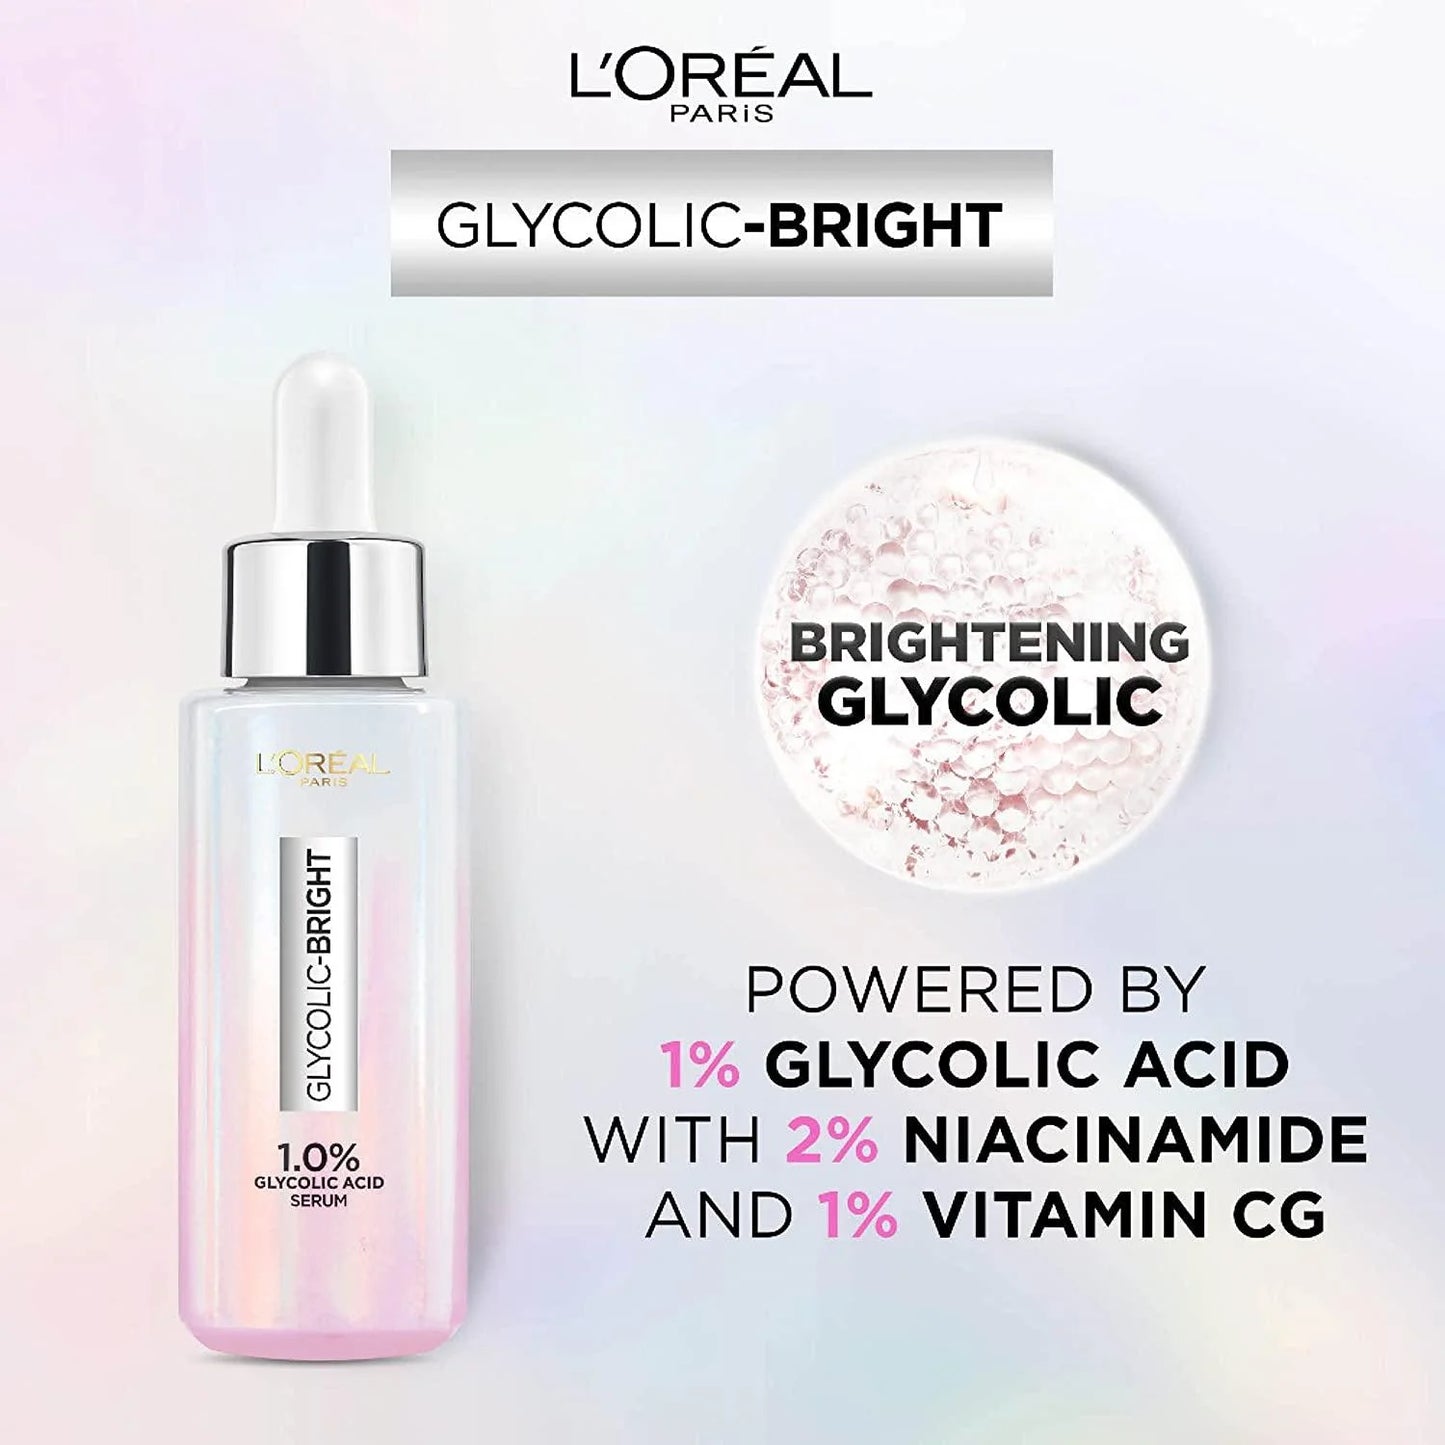 L'Oreal Paris Glycolic Bright 1.0% Glycolic Acid Instant Glowing Face Serum